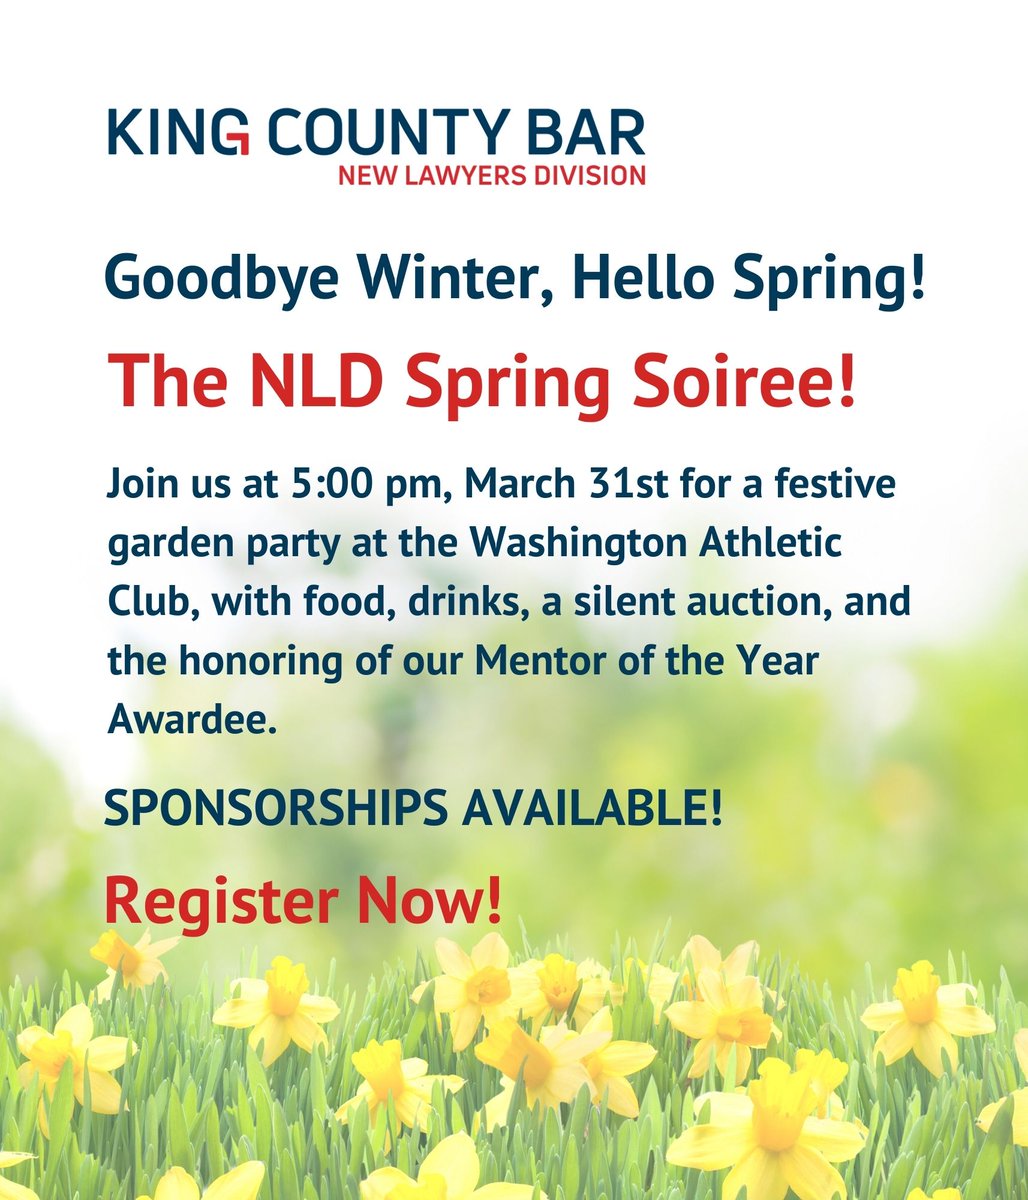 Register now at kcba.org/Calendar/Speci… #lawyer #spring #event #seattle